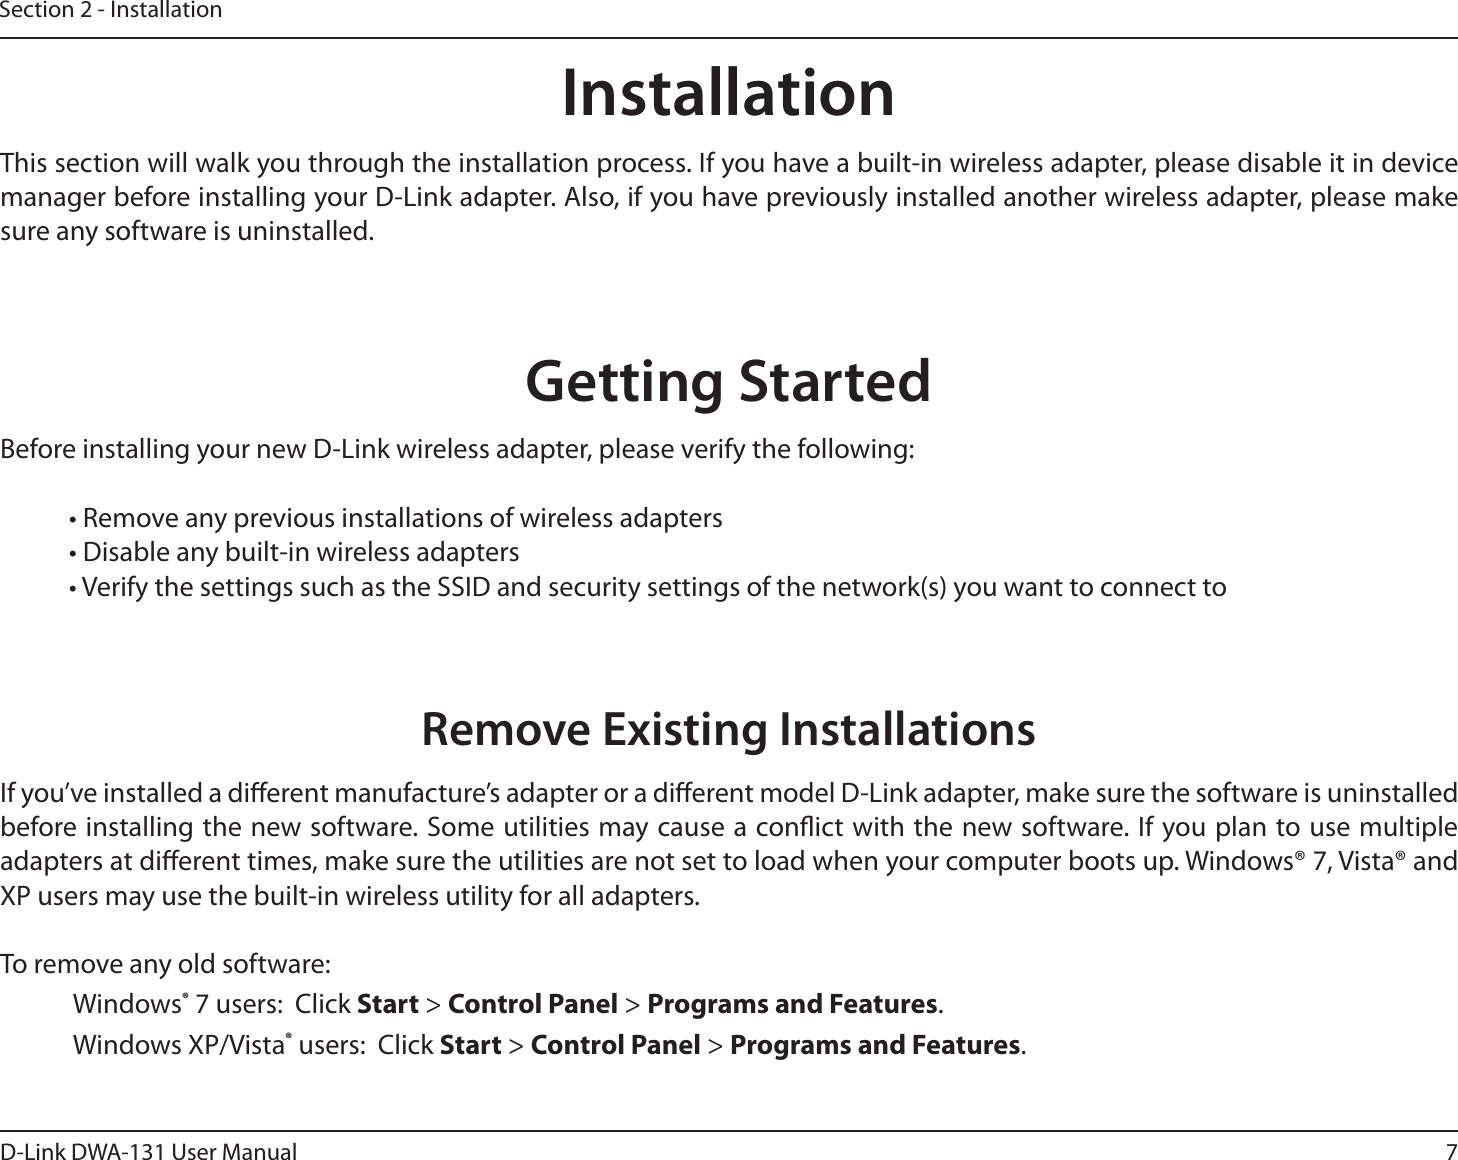 7D-Link DWA-131 User ManualSection 2 - InstallationGetting StartedInstallationThis section will walk you through the installation process. If you have a built-in wireless adapter, please disable it in device manager before installing your D-Link adapter. Also, if you have previously installed another wireless adapter, please make sure any software is uninstalled.Before installing your new D-Link wireless adapter, please verify the following:• Remove any previous installations of wireless adapters• Disable any built-in wireless adapters • Verify the settings such as the SSID and security settings of the network(s) you want to connect toRemove Existing InstallationsIf you’ve installed a dierent manufacture’s adapter or a dierent model D-Link adapter, make sure the software is uninstalled before installing the new software. Some utilities may cause a conict with the new software. If you plan to use multiple adapters at dierent times, make sure the utilities are not set to load when your computer boots up. Windows® 7, Vista® and XP users may use the built-in wireless utility for all adapters.To remove any old software: Windows® 7 users:  Click Start &gt; Control Panel &gt; Programs and Features. Windows XP/Vista® users:  Click Start &gt; Control Panel &gt; Programs and Features. 